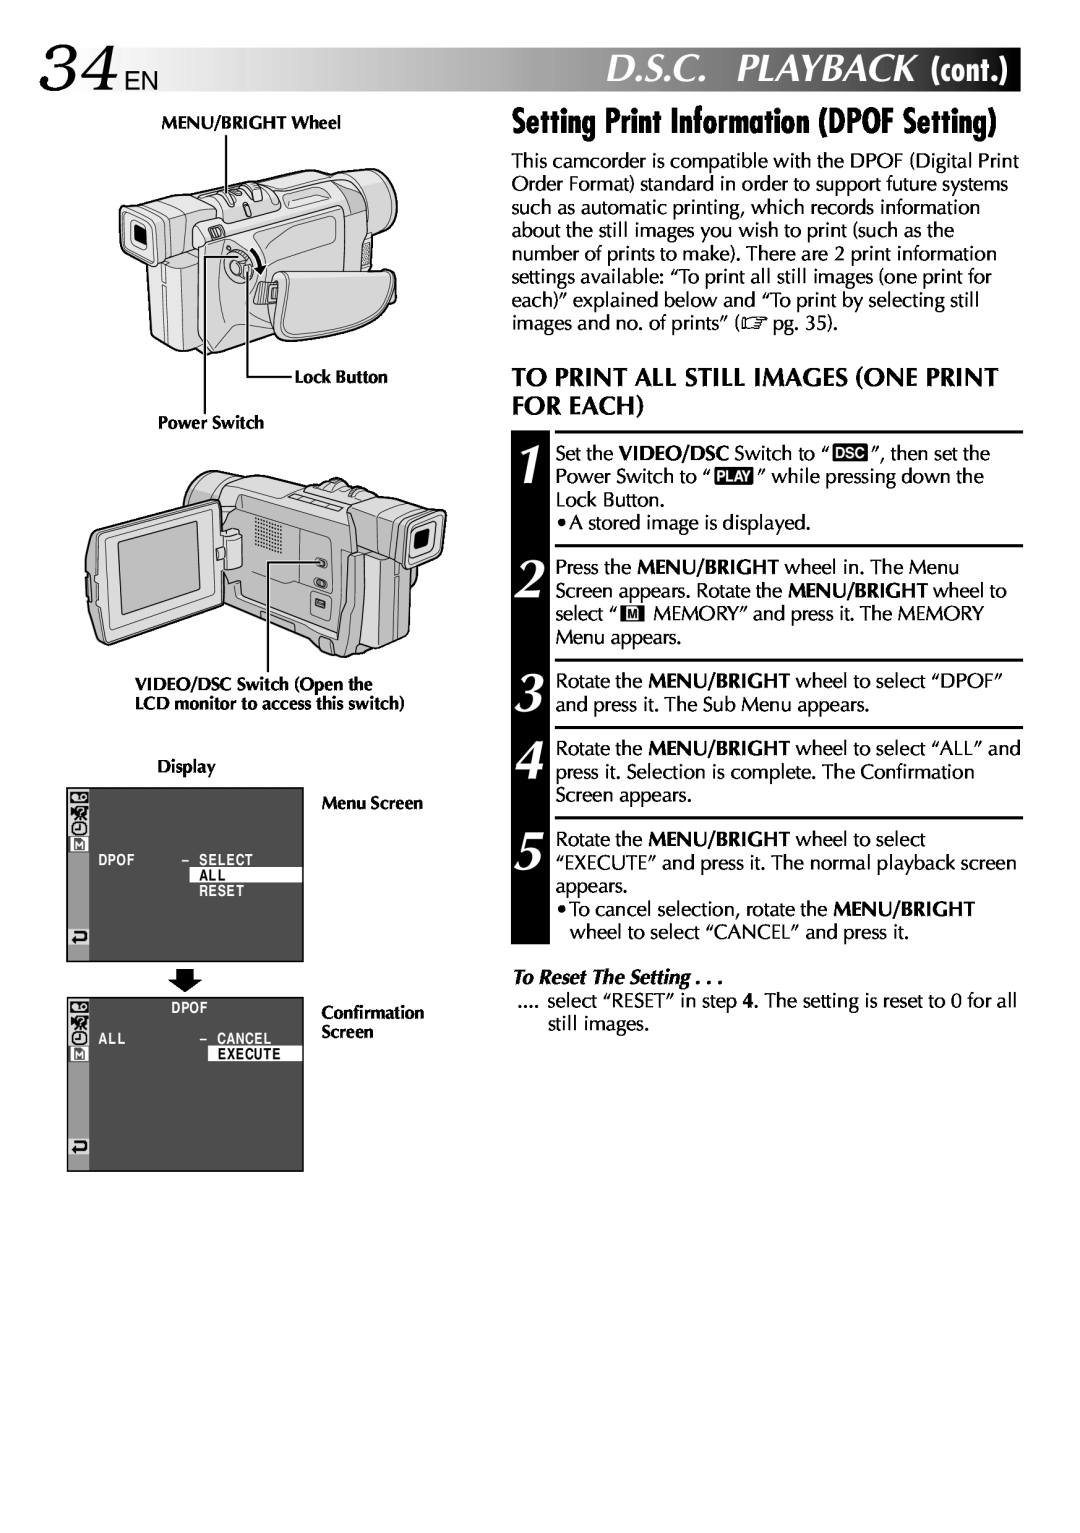 JVC GR-DVL512 specifications 34 EN, Setting Print Information DPOF Setting, To Print All Still Images One Print For Each 